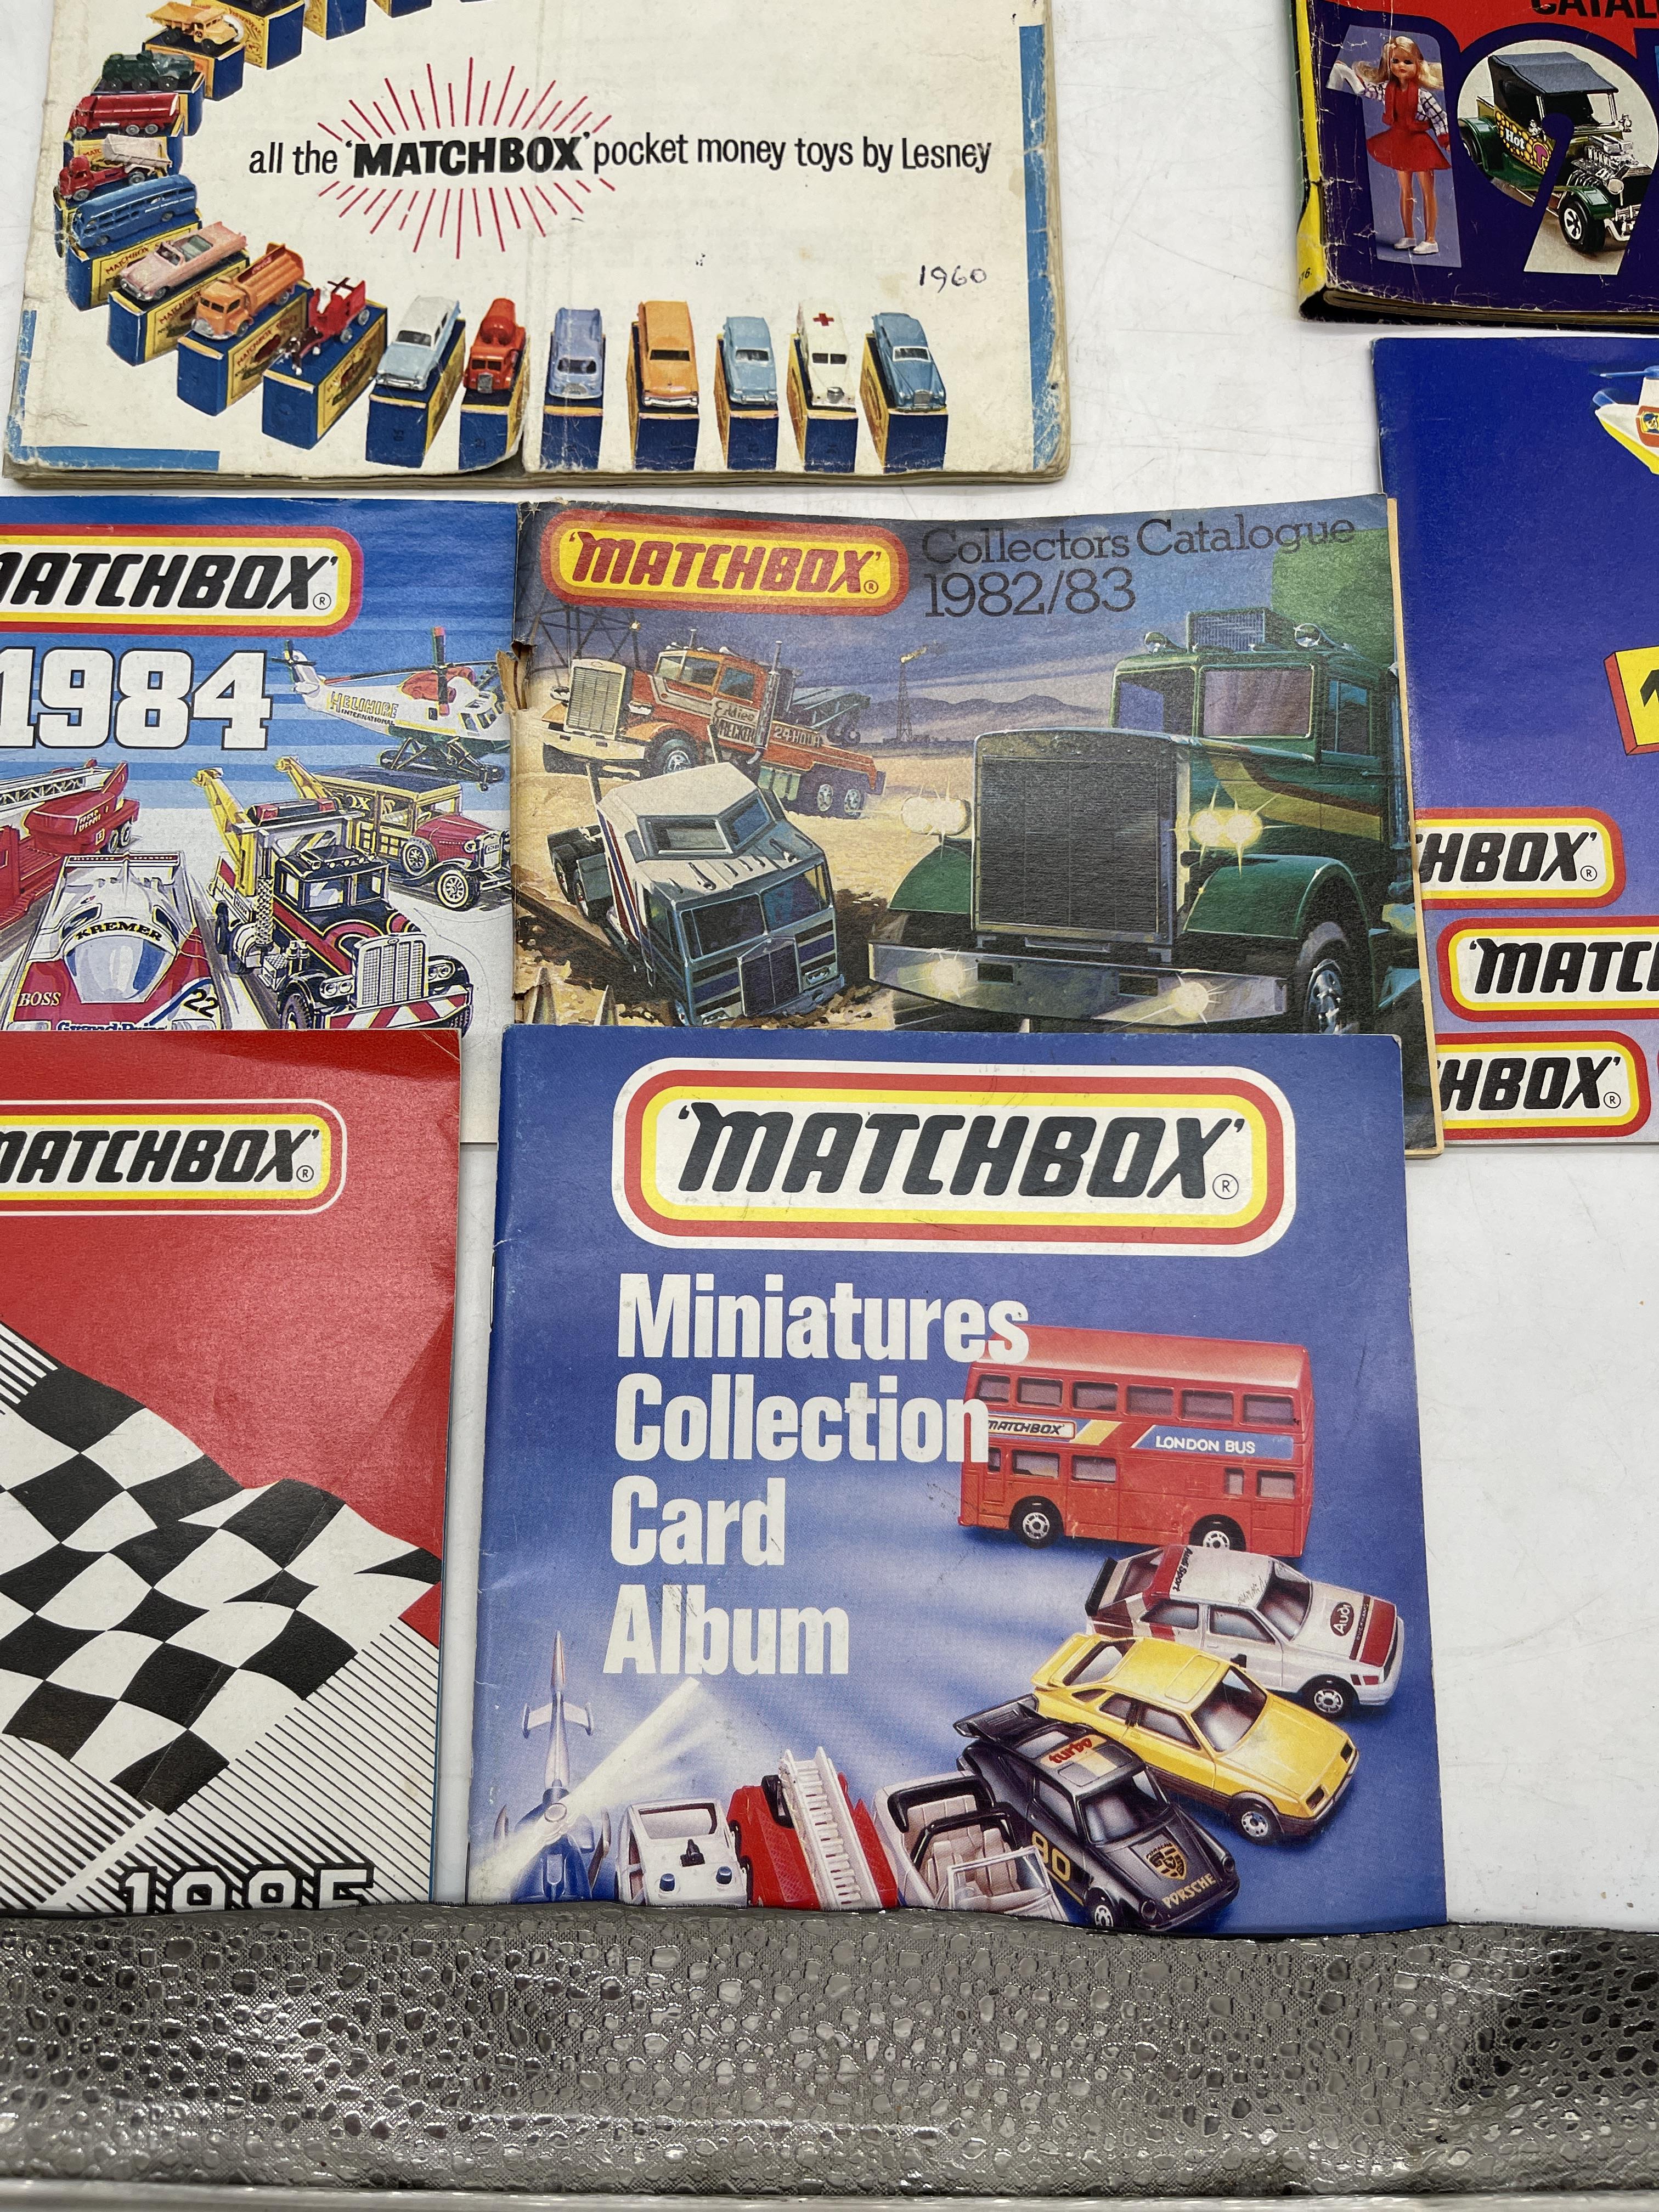 Vintage model car catalogues to include matchbox pocket money 1960s - Image 16 of 20